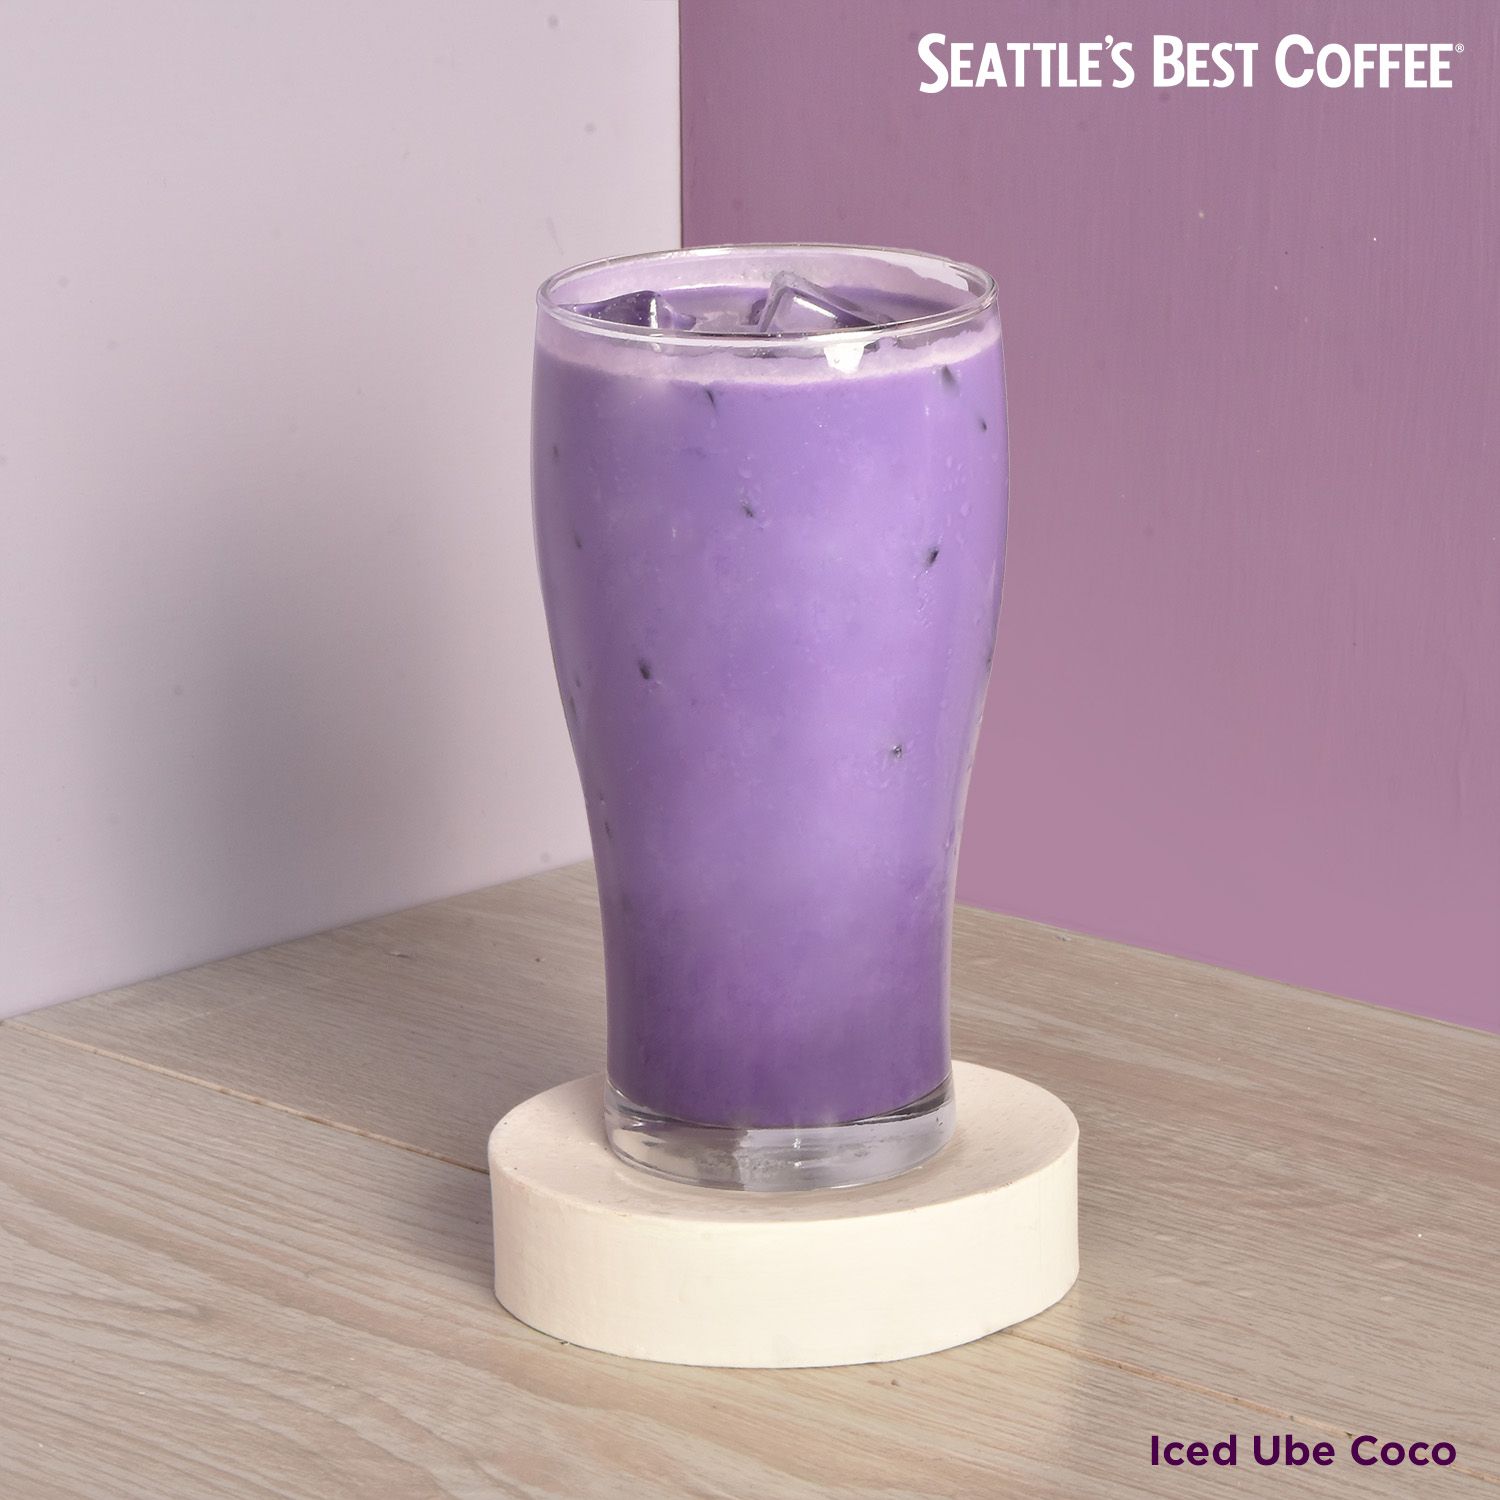 Seattle's Best Coffee Iced Ube Coco